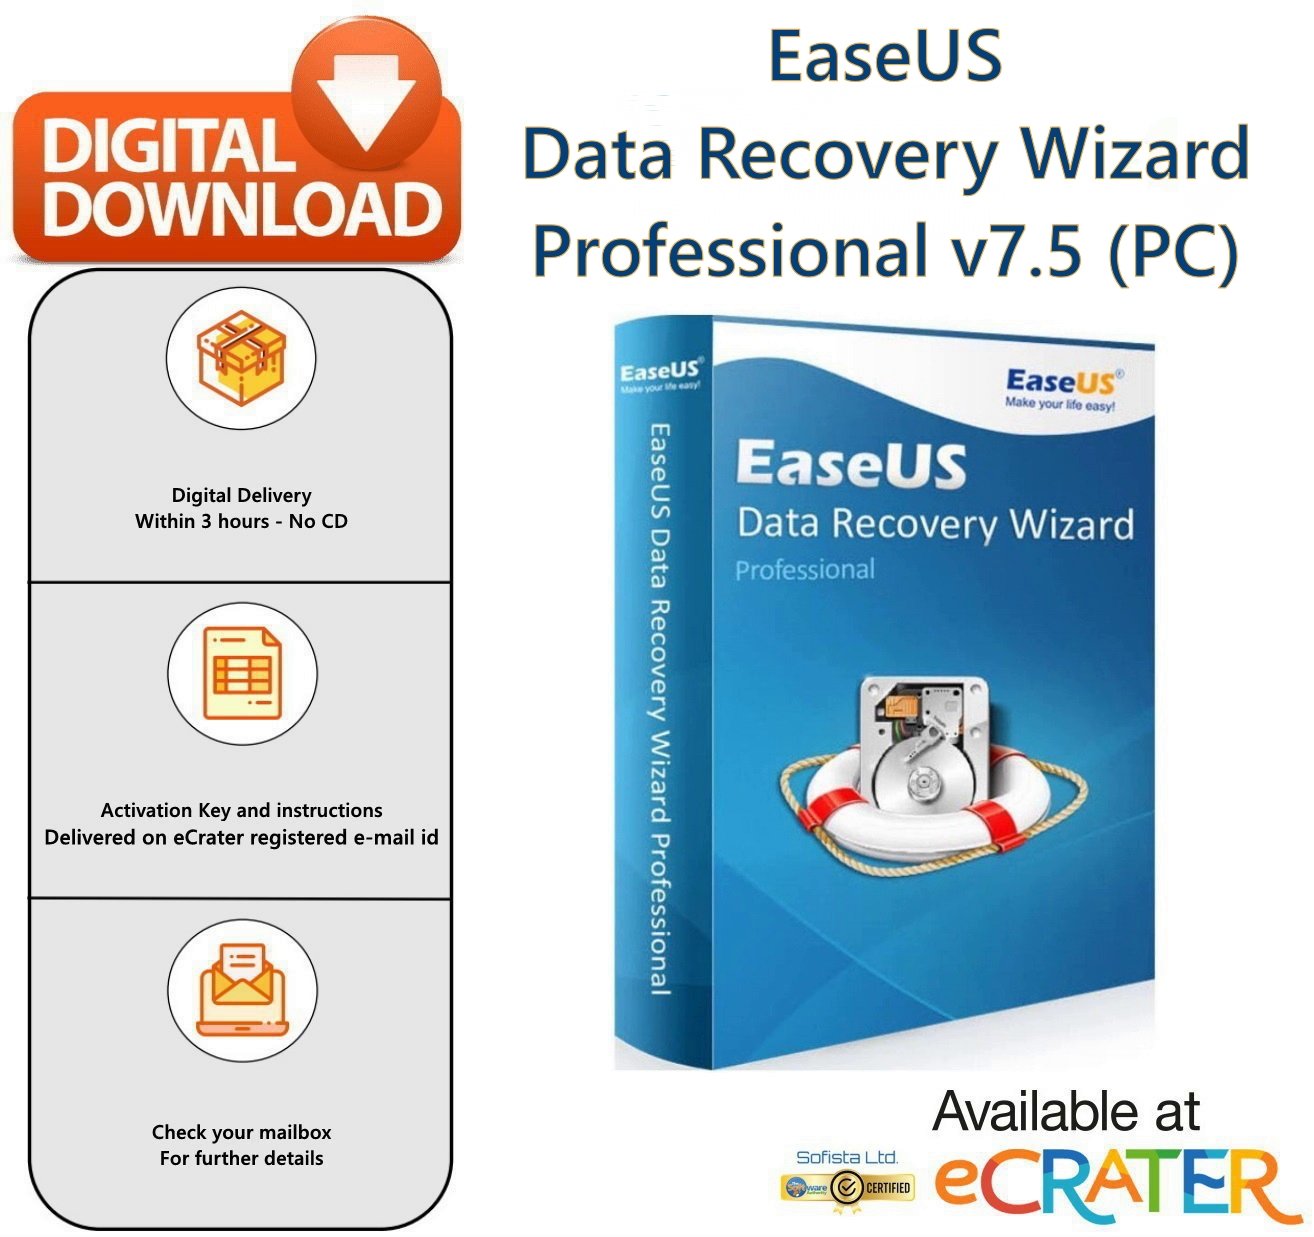 Easeus Data Recovery Wizard Professional 7.5 Download